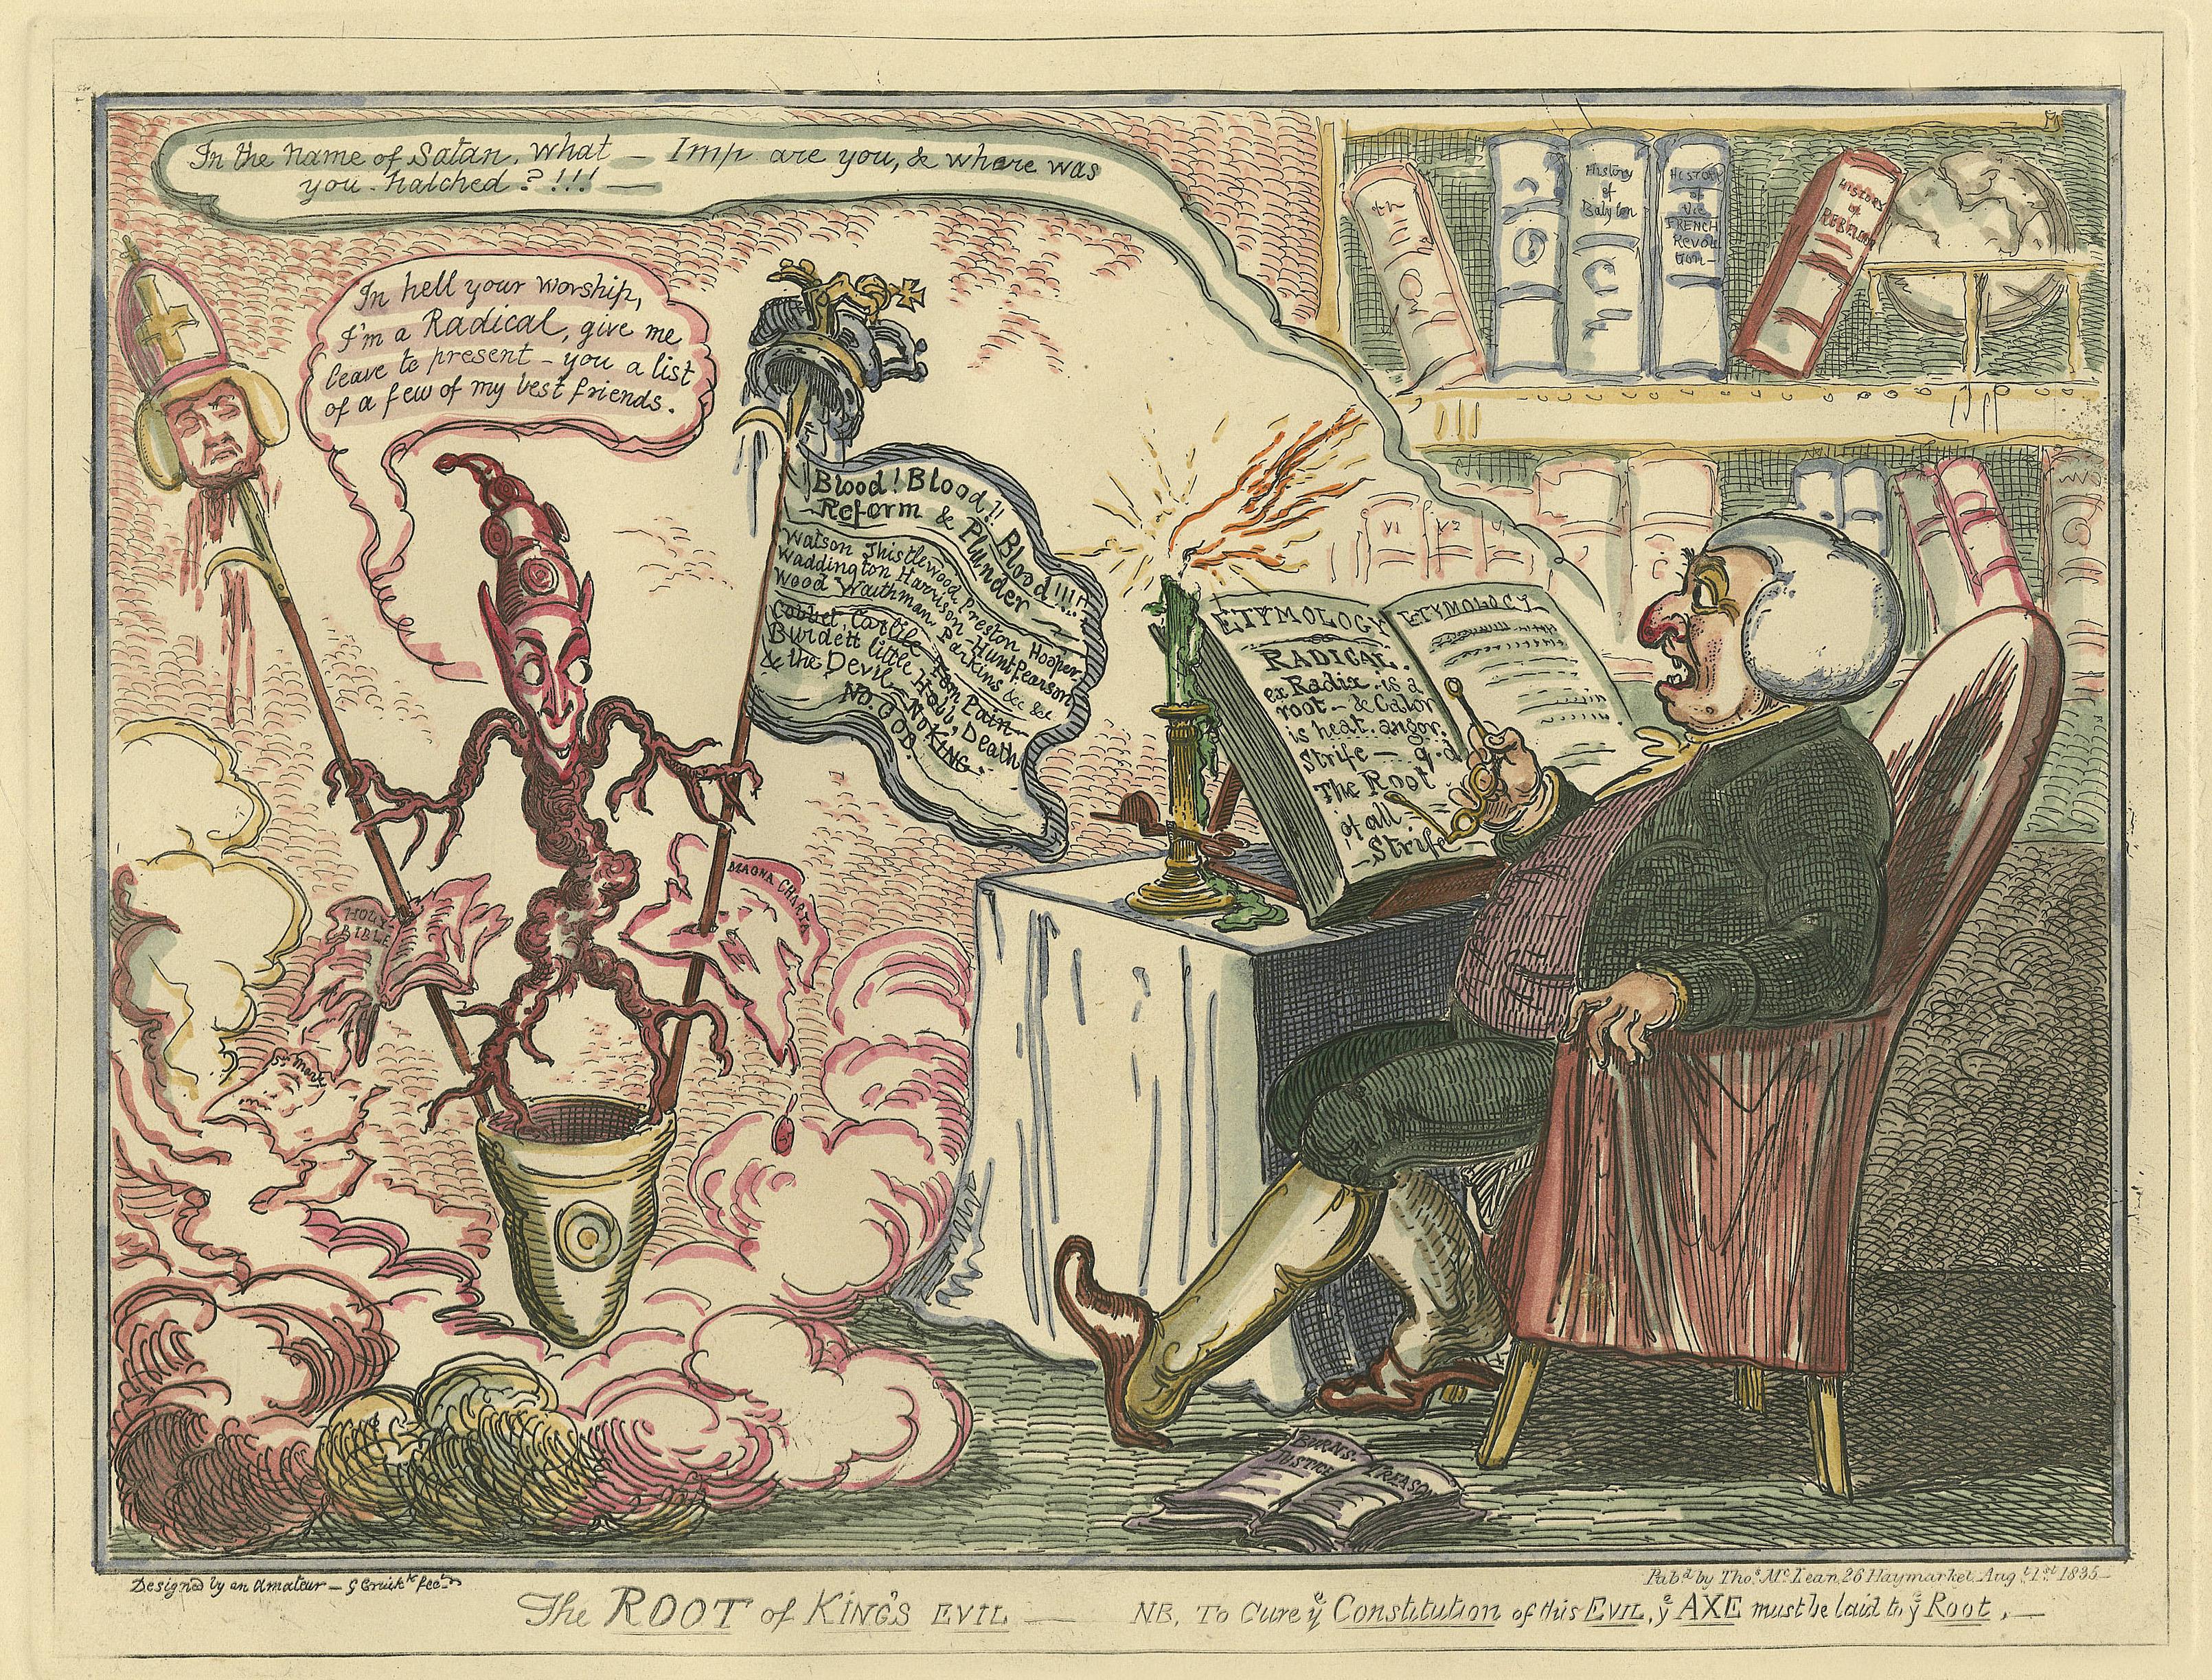 George Cruikshank Interior Print - The Root of King’s Evil, NB To cure the Constitution of this evil, the axe ...